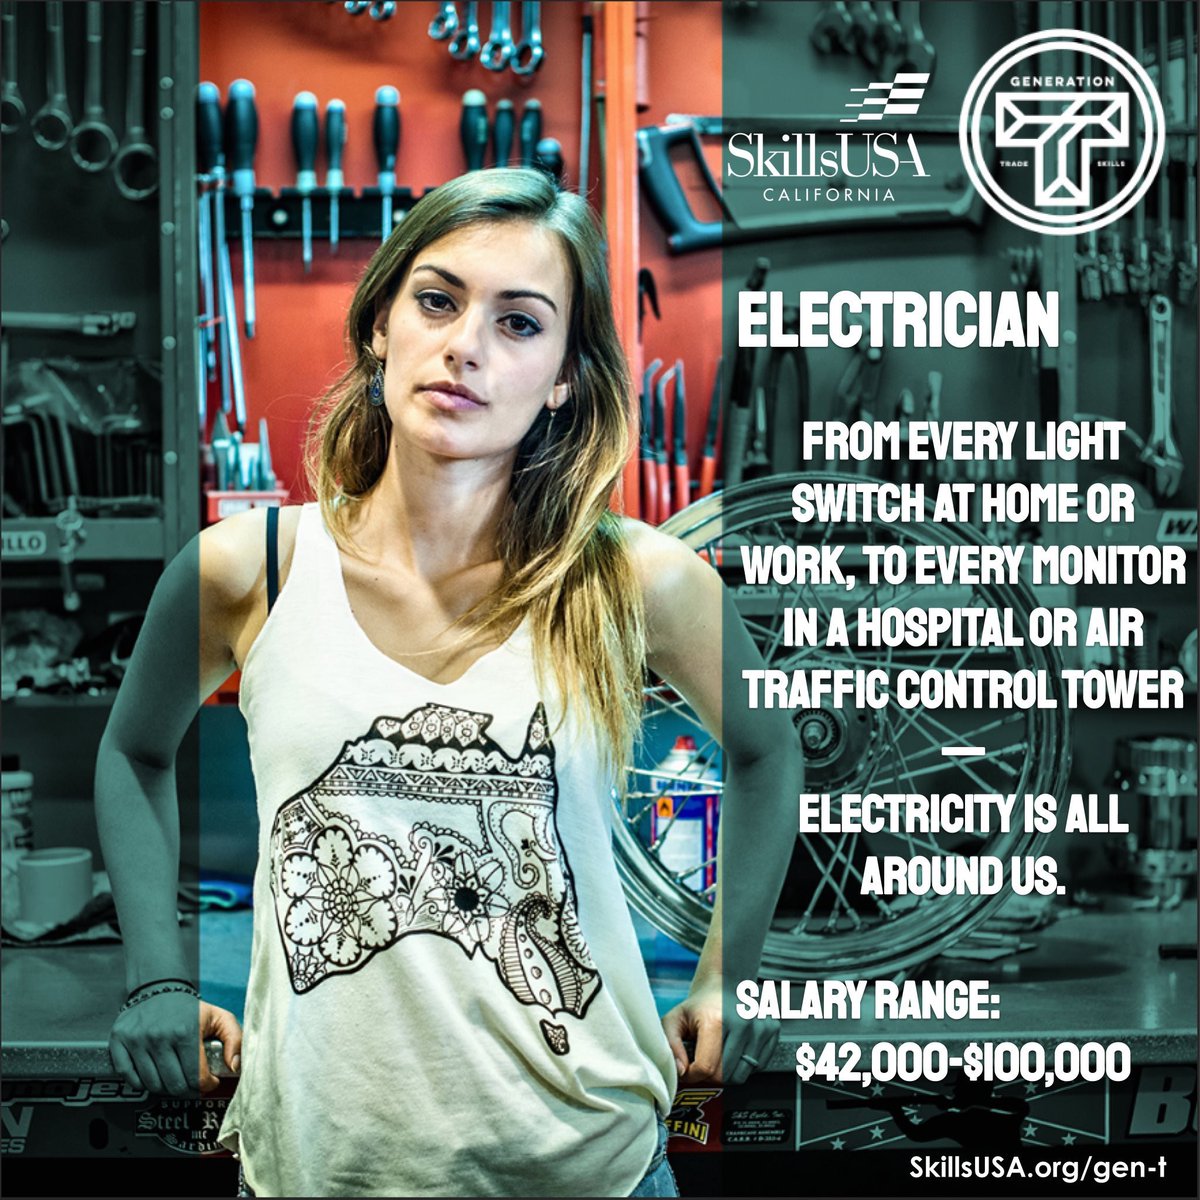 They power our lives in the most fundamental way, fueling us, guiding us and allowing us to move forward. The path from the industrial age to the modern day is illuminated by the work of electricians. Learn more about a @GenerationT Electrician career at SkillsUSA.org/gen-t